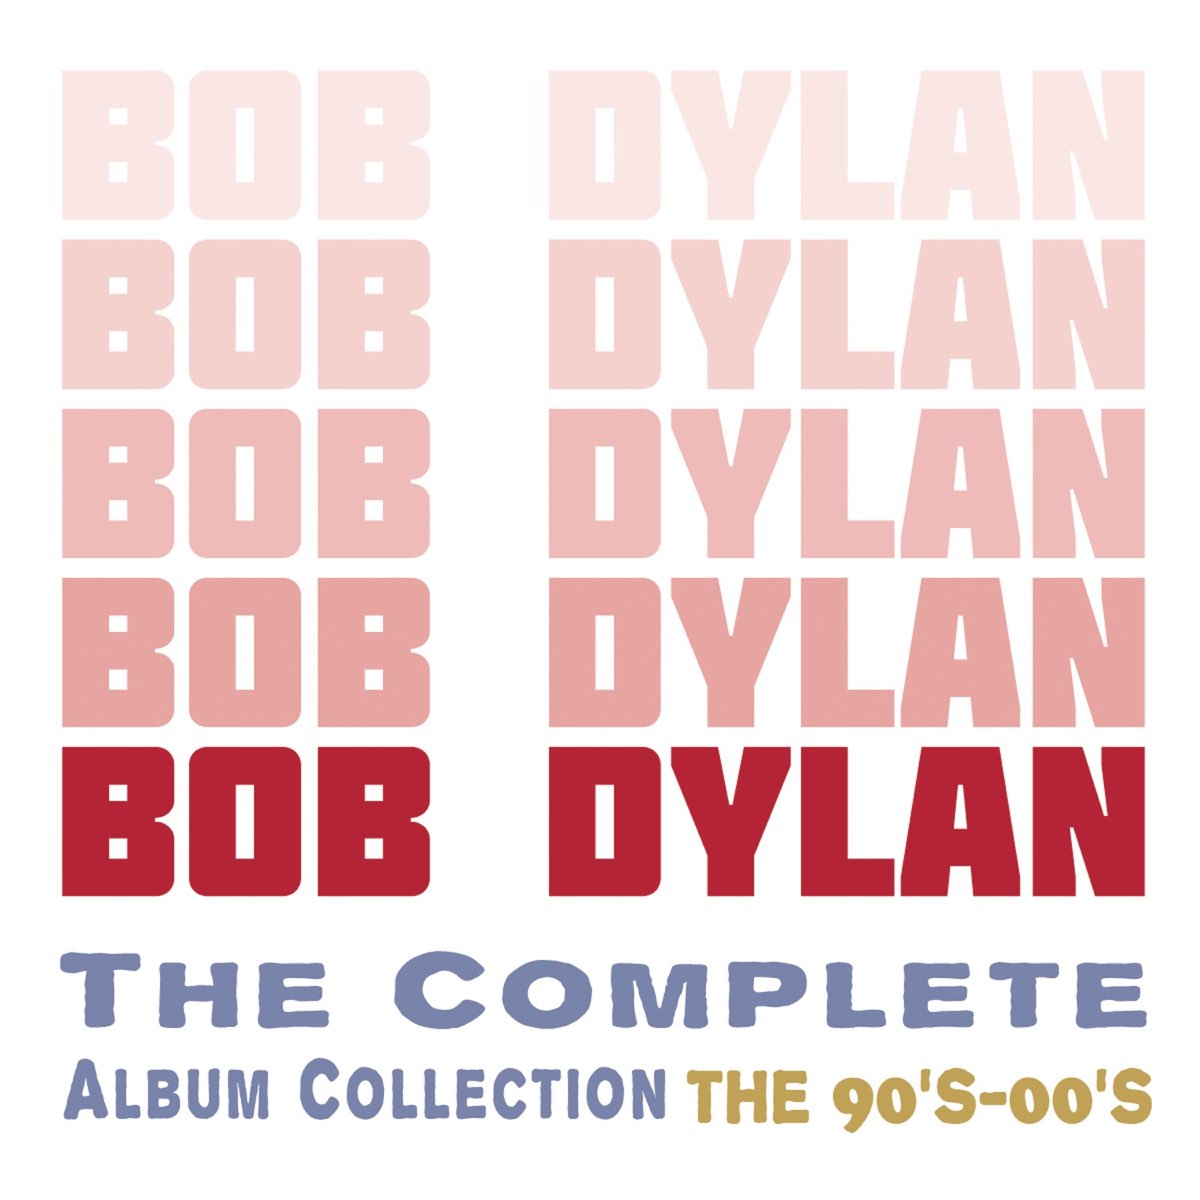 The Complete Album Collection: The 90's-00's by Bob Dylan on iTunes